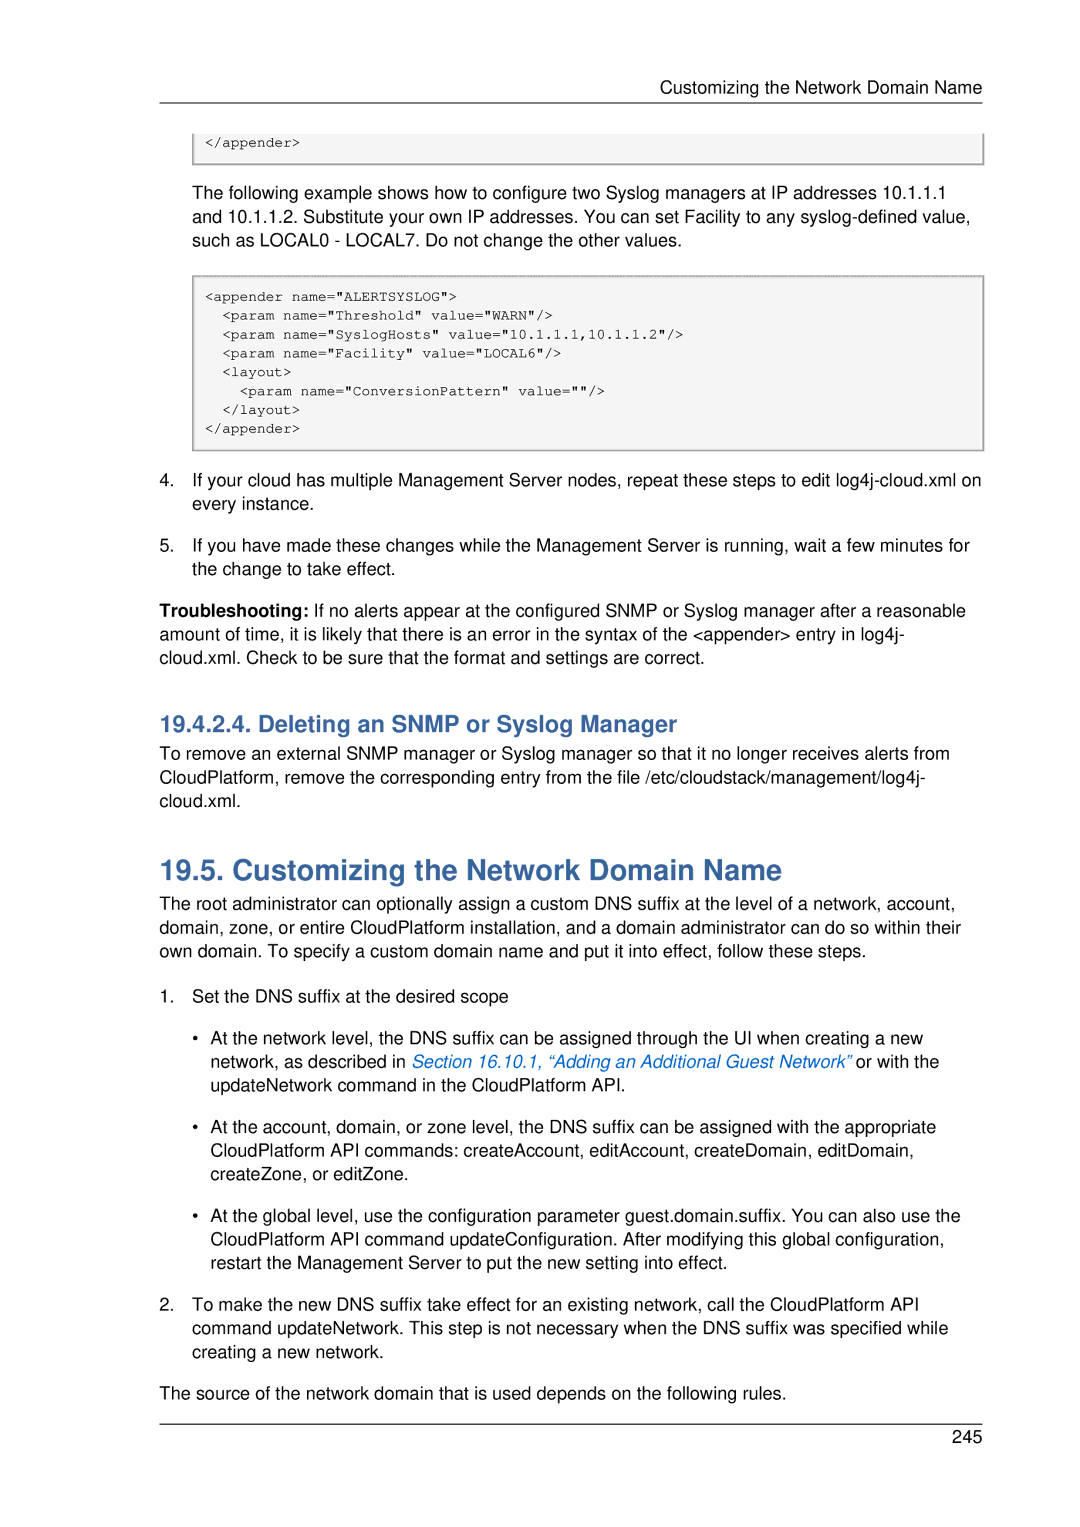 Citrix Systems 4.2 manual Customizing the Network Domain Name, Deleting an Snmp or Syslog Manager 